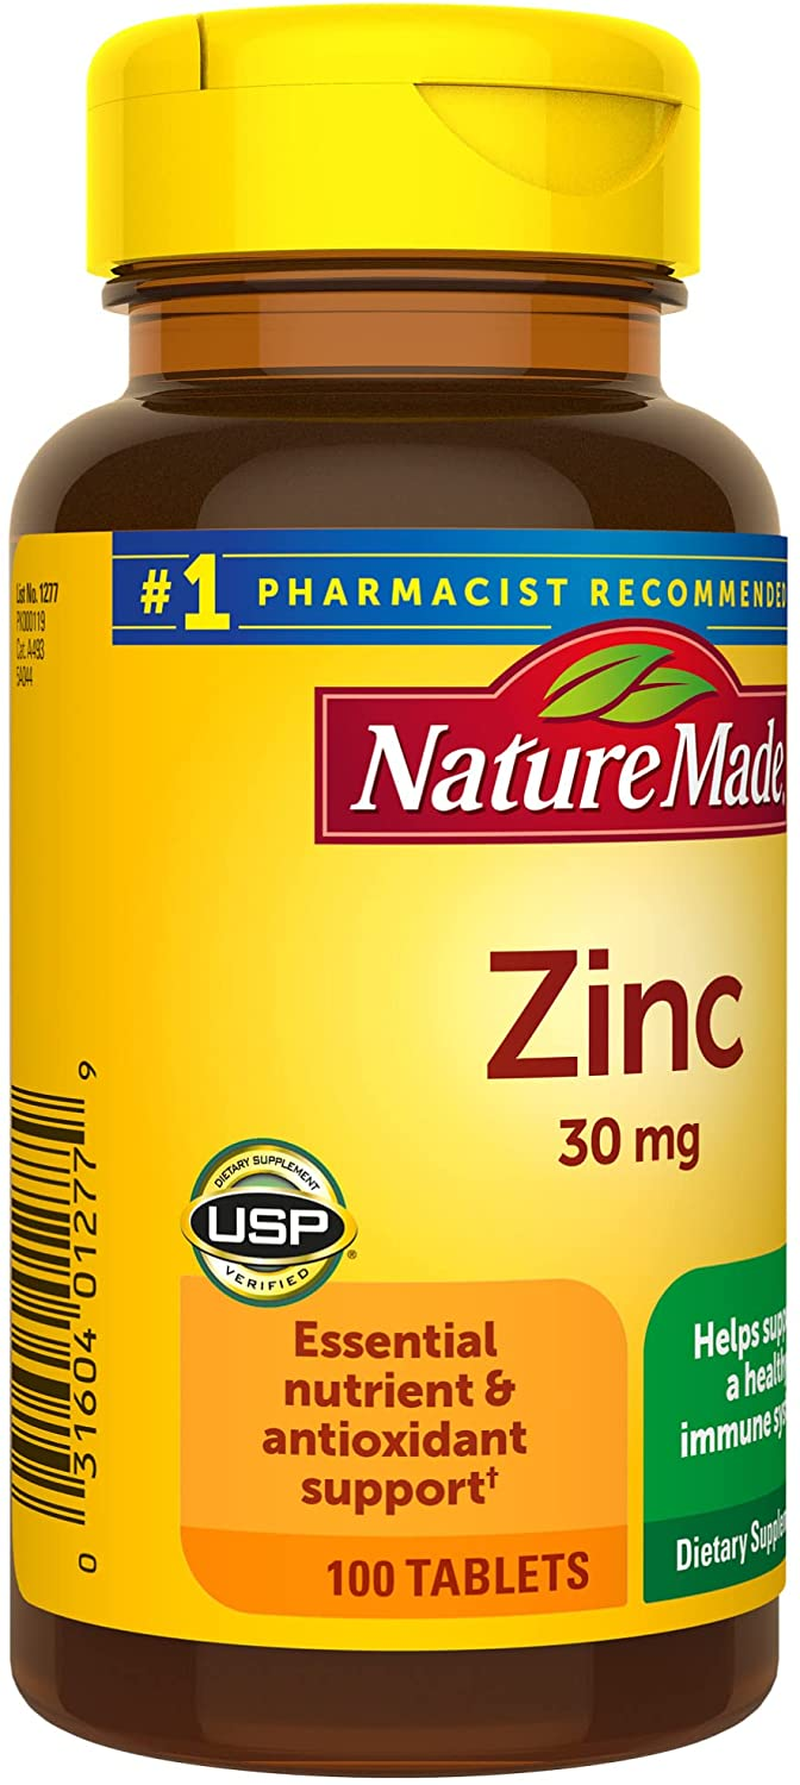 Nature Made Zinc 30 Mg Tablets, 100 Count for Immune System Support